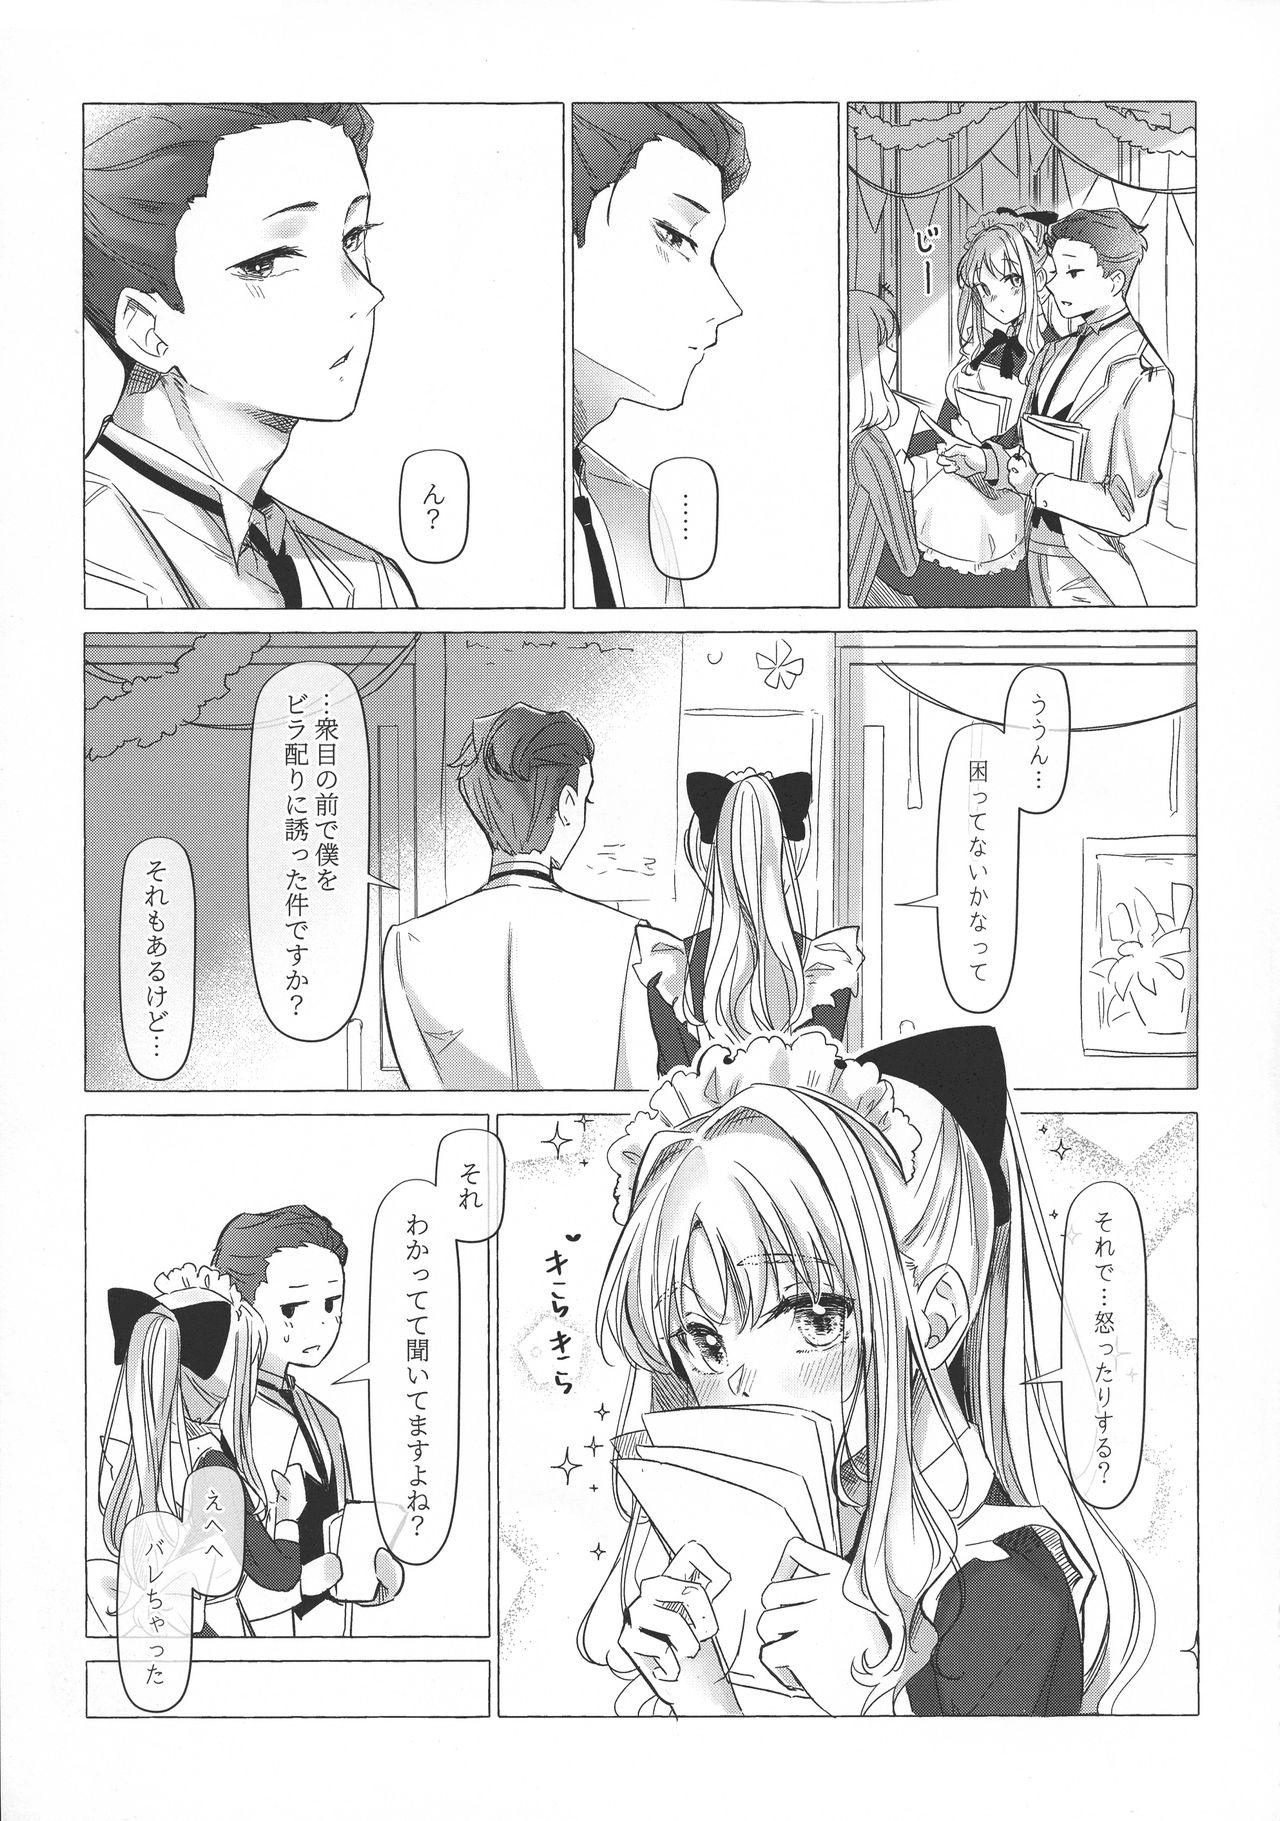 Blackmail 満心総意の躾 - Darling in the franxx Fucks - Page 6